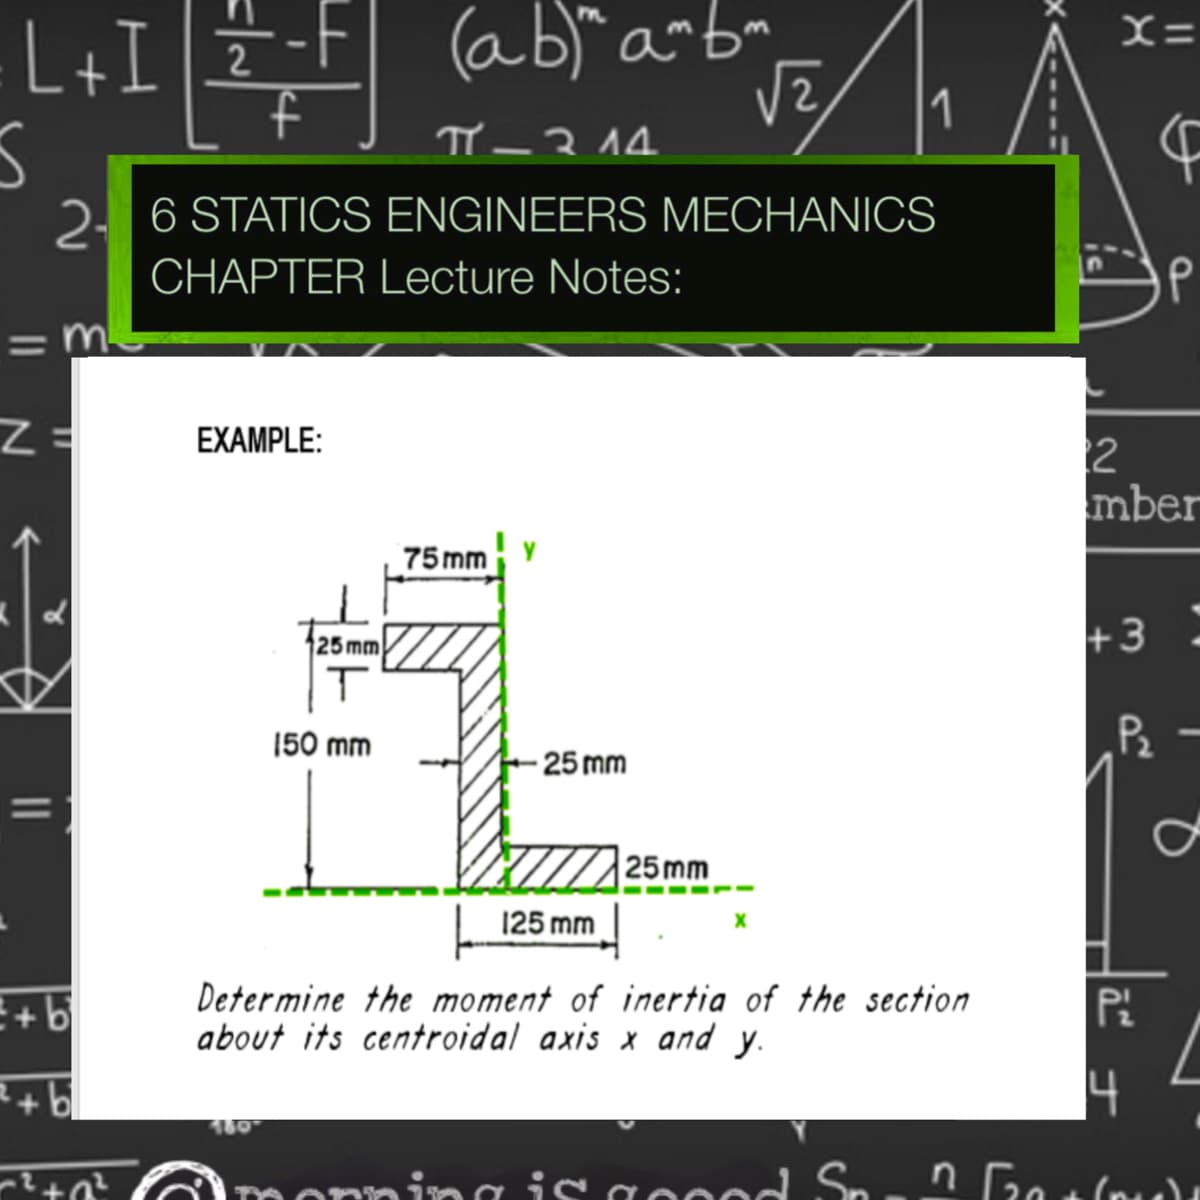 -F
ab)" a~bm
X=
L+I
2
1
TY –314.
F
2. 6 STATICS ENGINEERS MECHANICS
CHAPTER Lecture Notes:
=m
EXAMPLE:
2
mber
75mm
25 mm
+3
150 mm
P2
25 mm
%3D
25mm
125 mm
Determine the moment of inertia of the section
E+ b
about its centroidal axis x and y.
+ b
ナ
